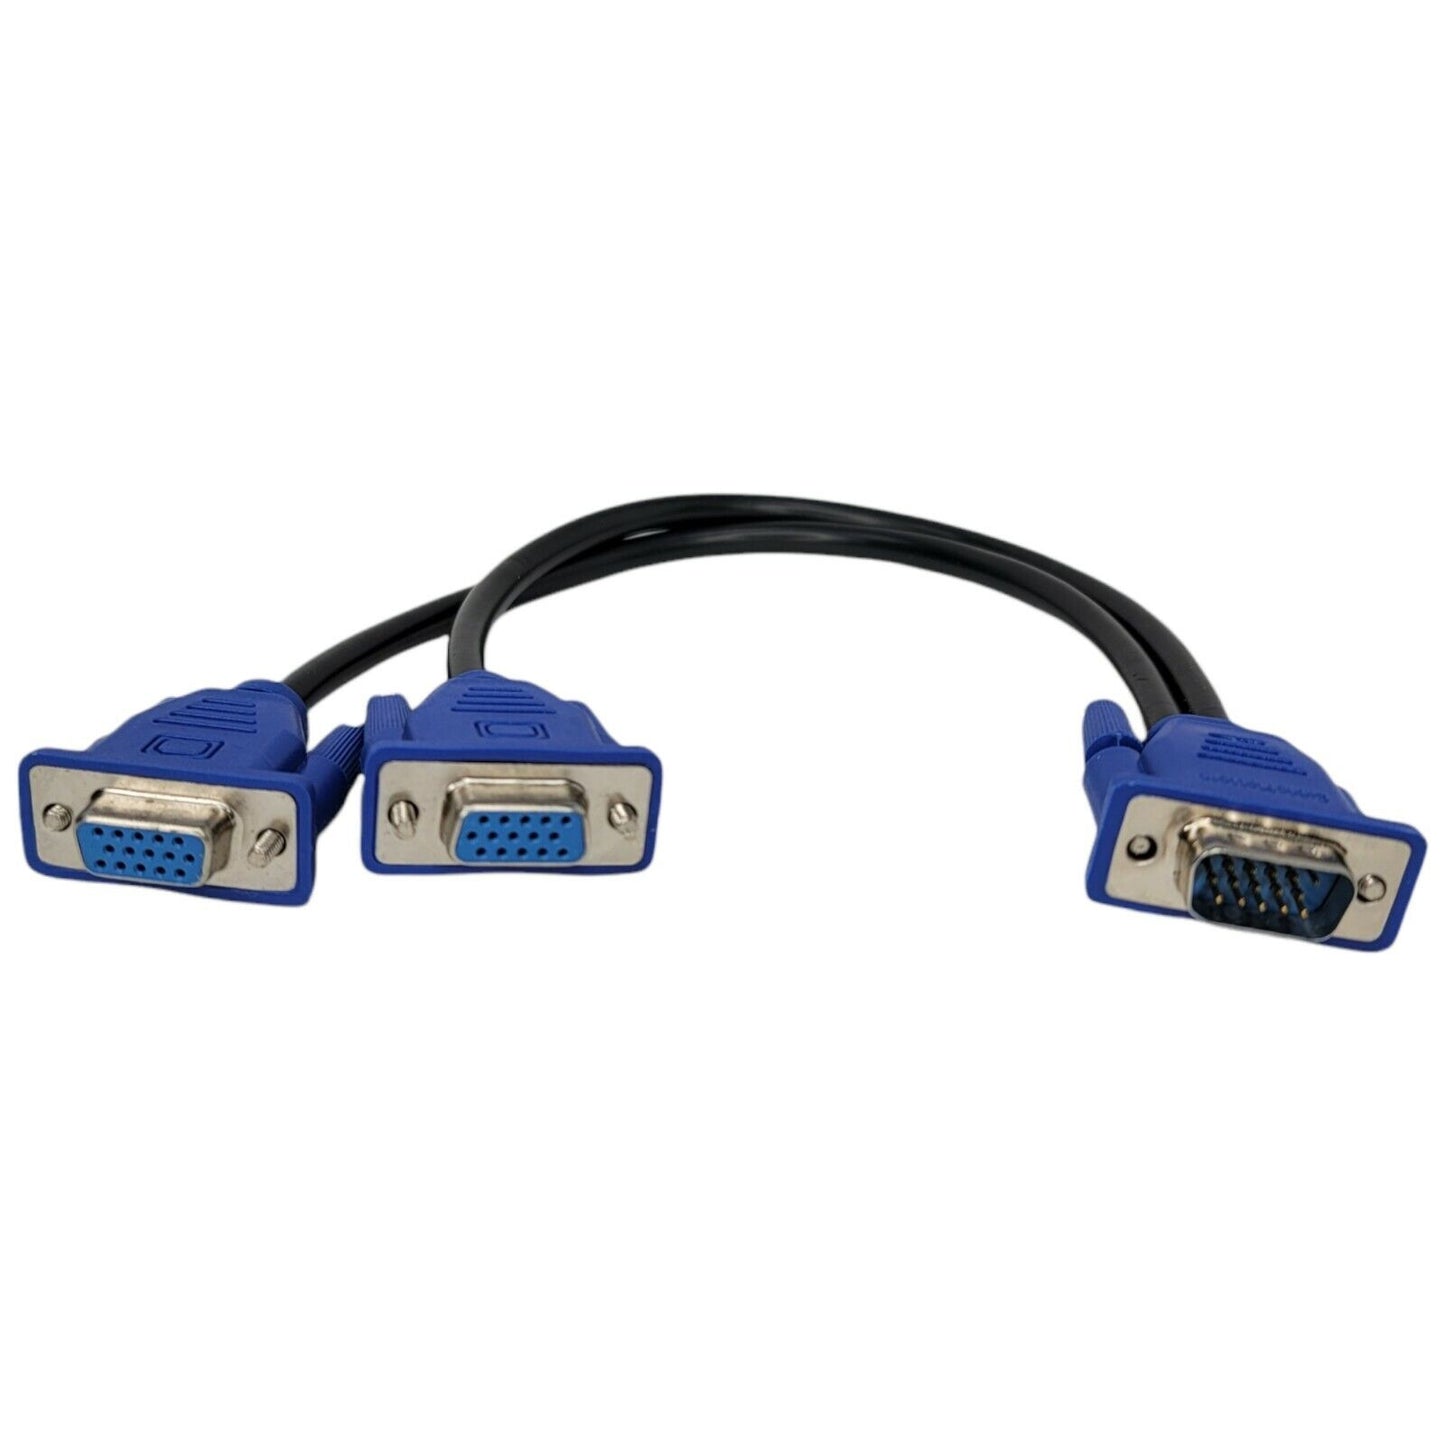 Cable Matters VGA Splitter Cable (VGA Y Cable) for Screen Duplication 1'